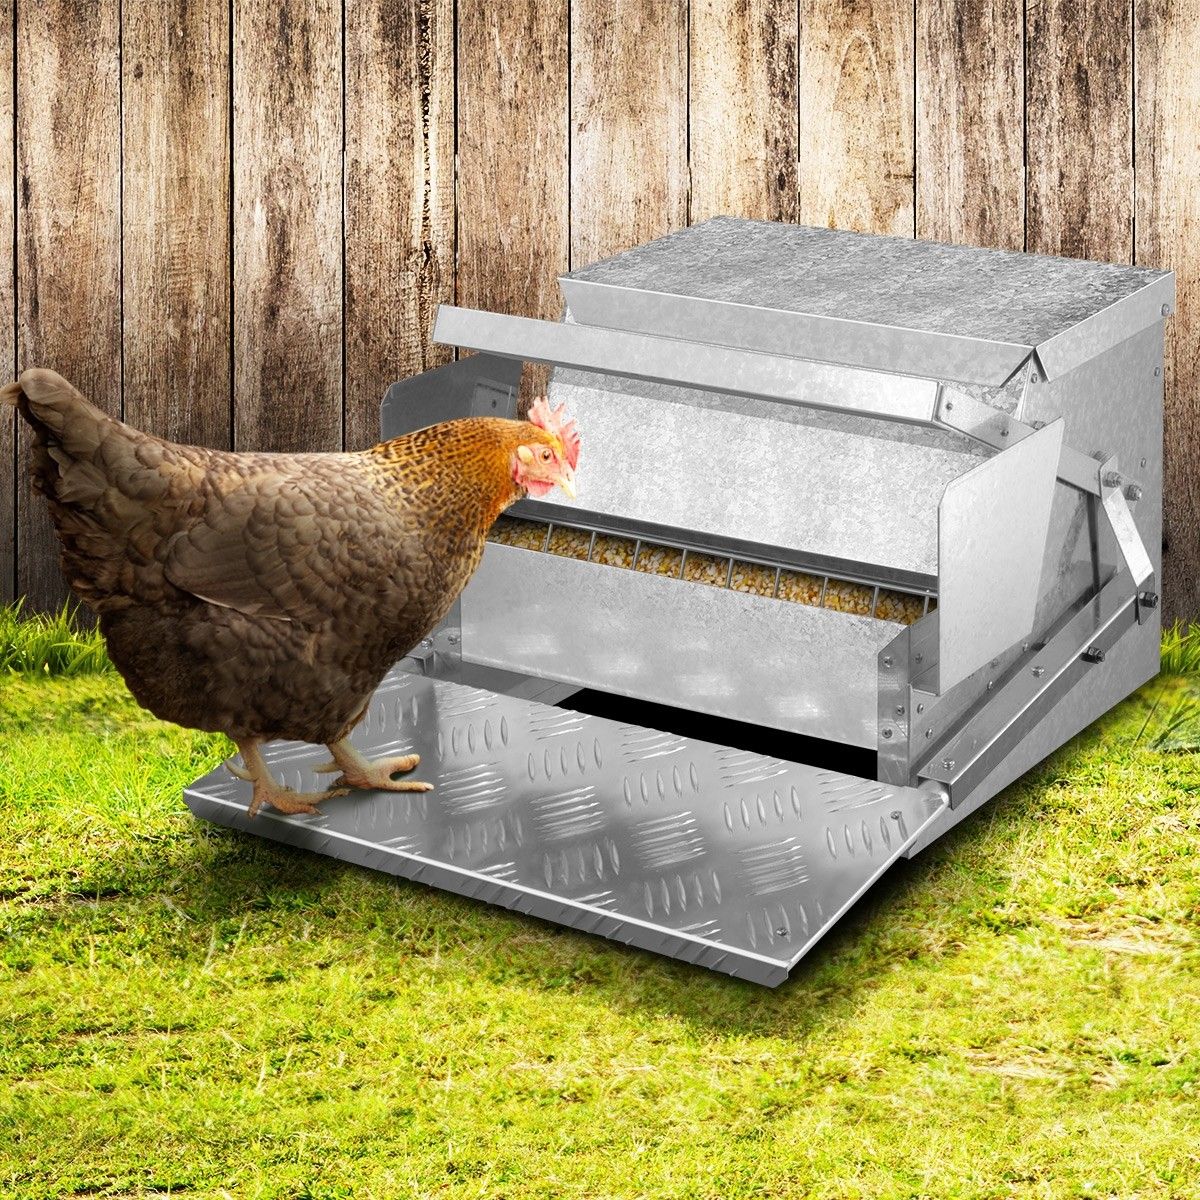 Auto Chicken Feeder Galvanized Steel Poultry Automatic Feeding Trough Spill Proof Tread Plate